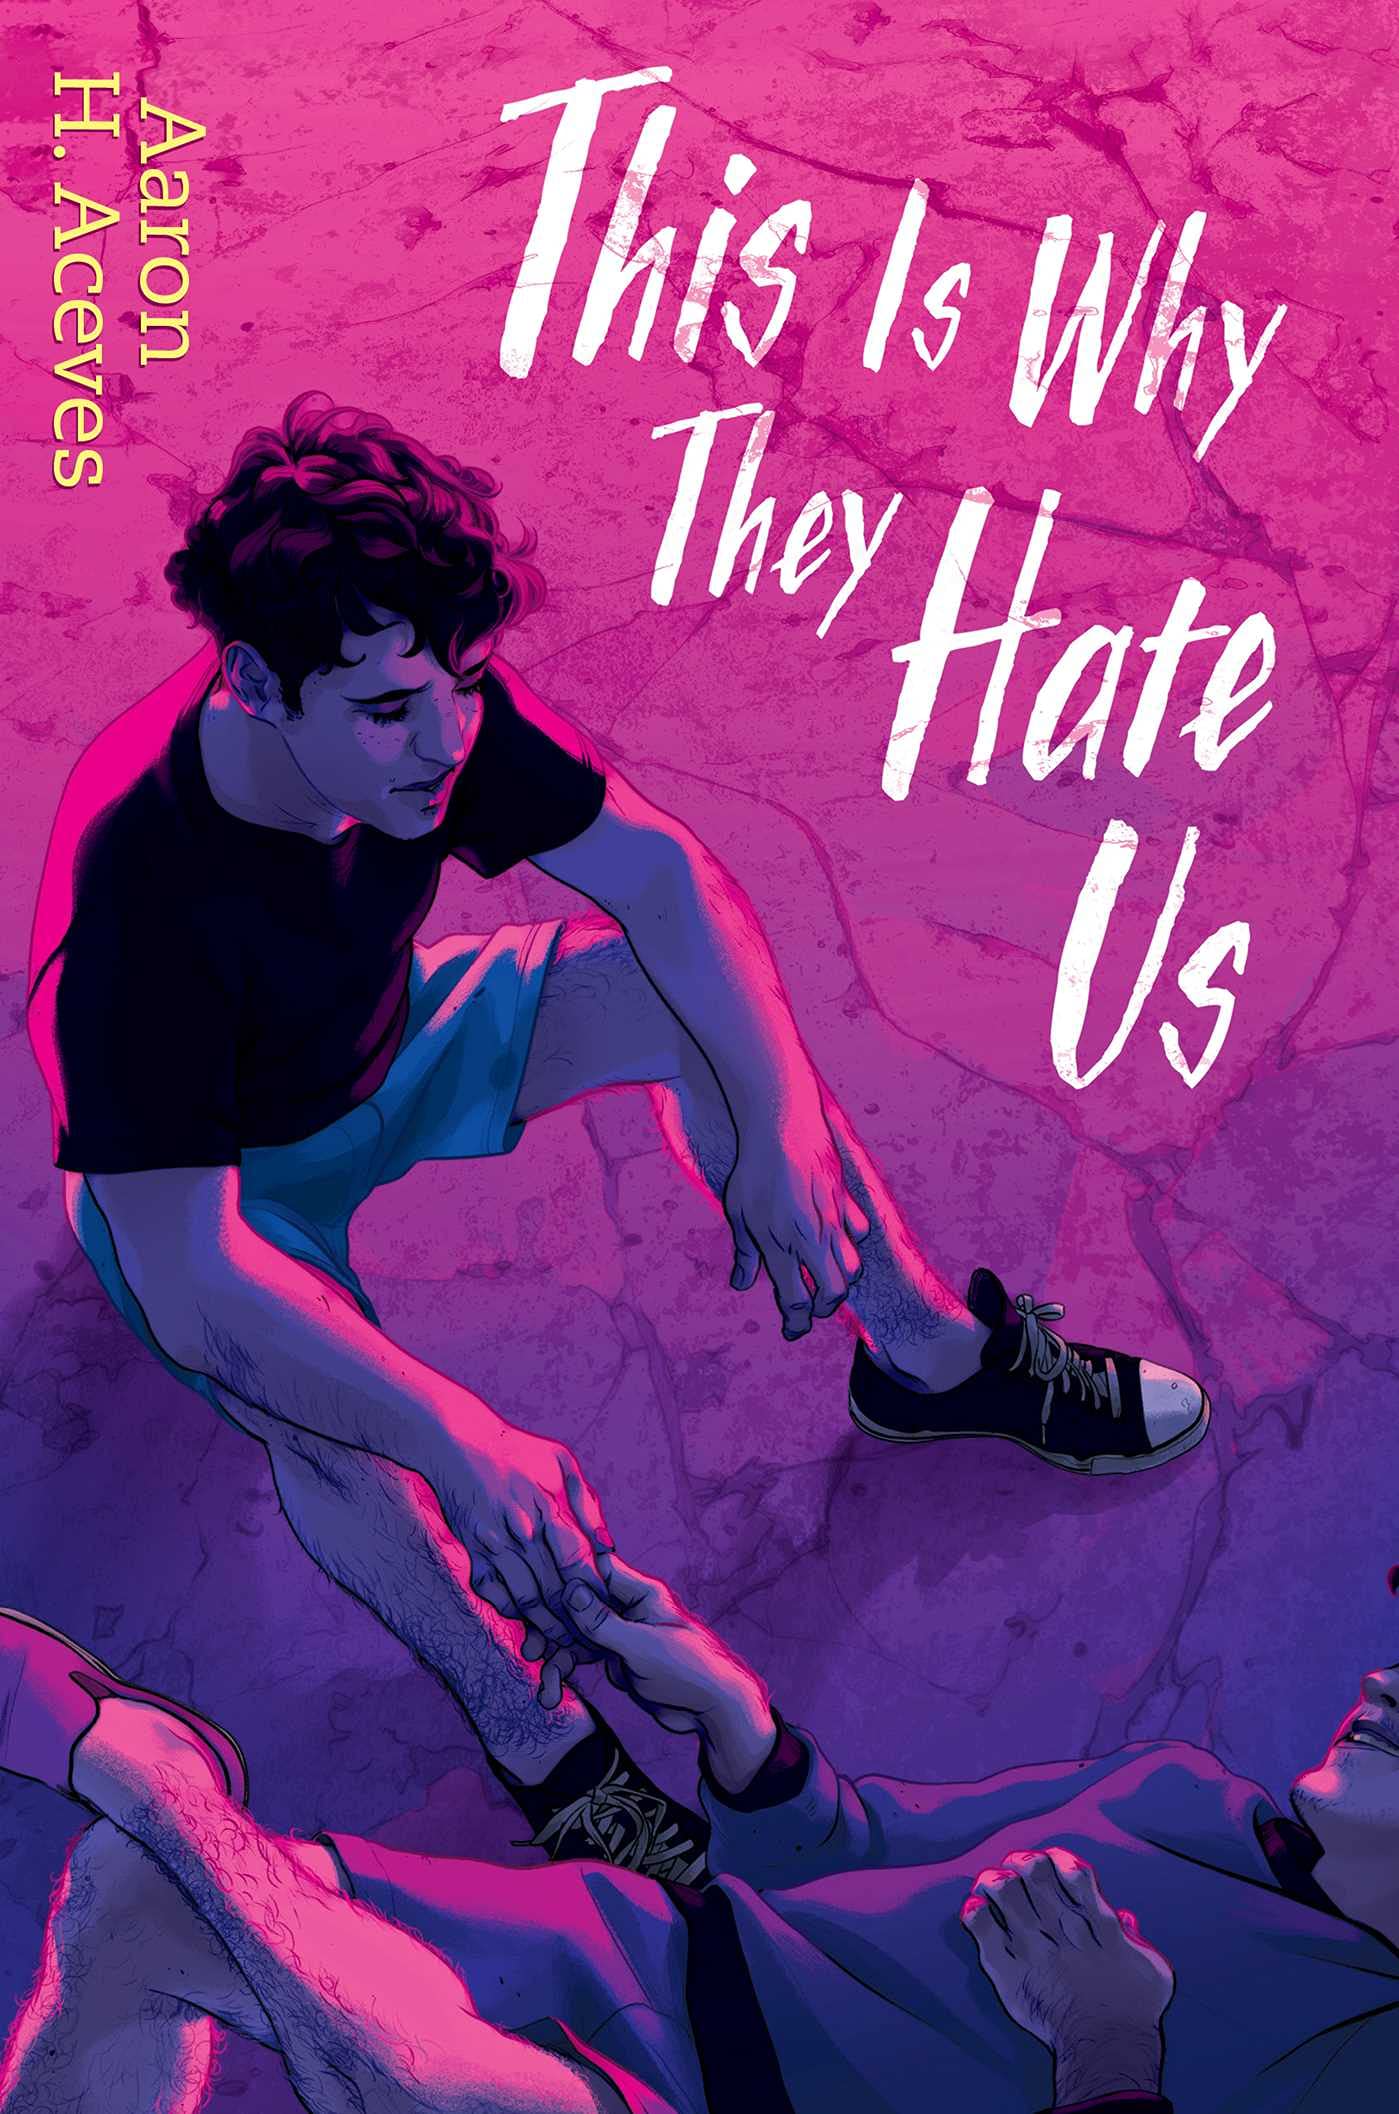 Cover of “This Is Why They Hate Us” by Aaron H. Aceves